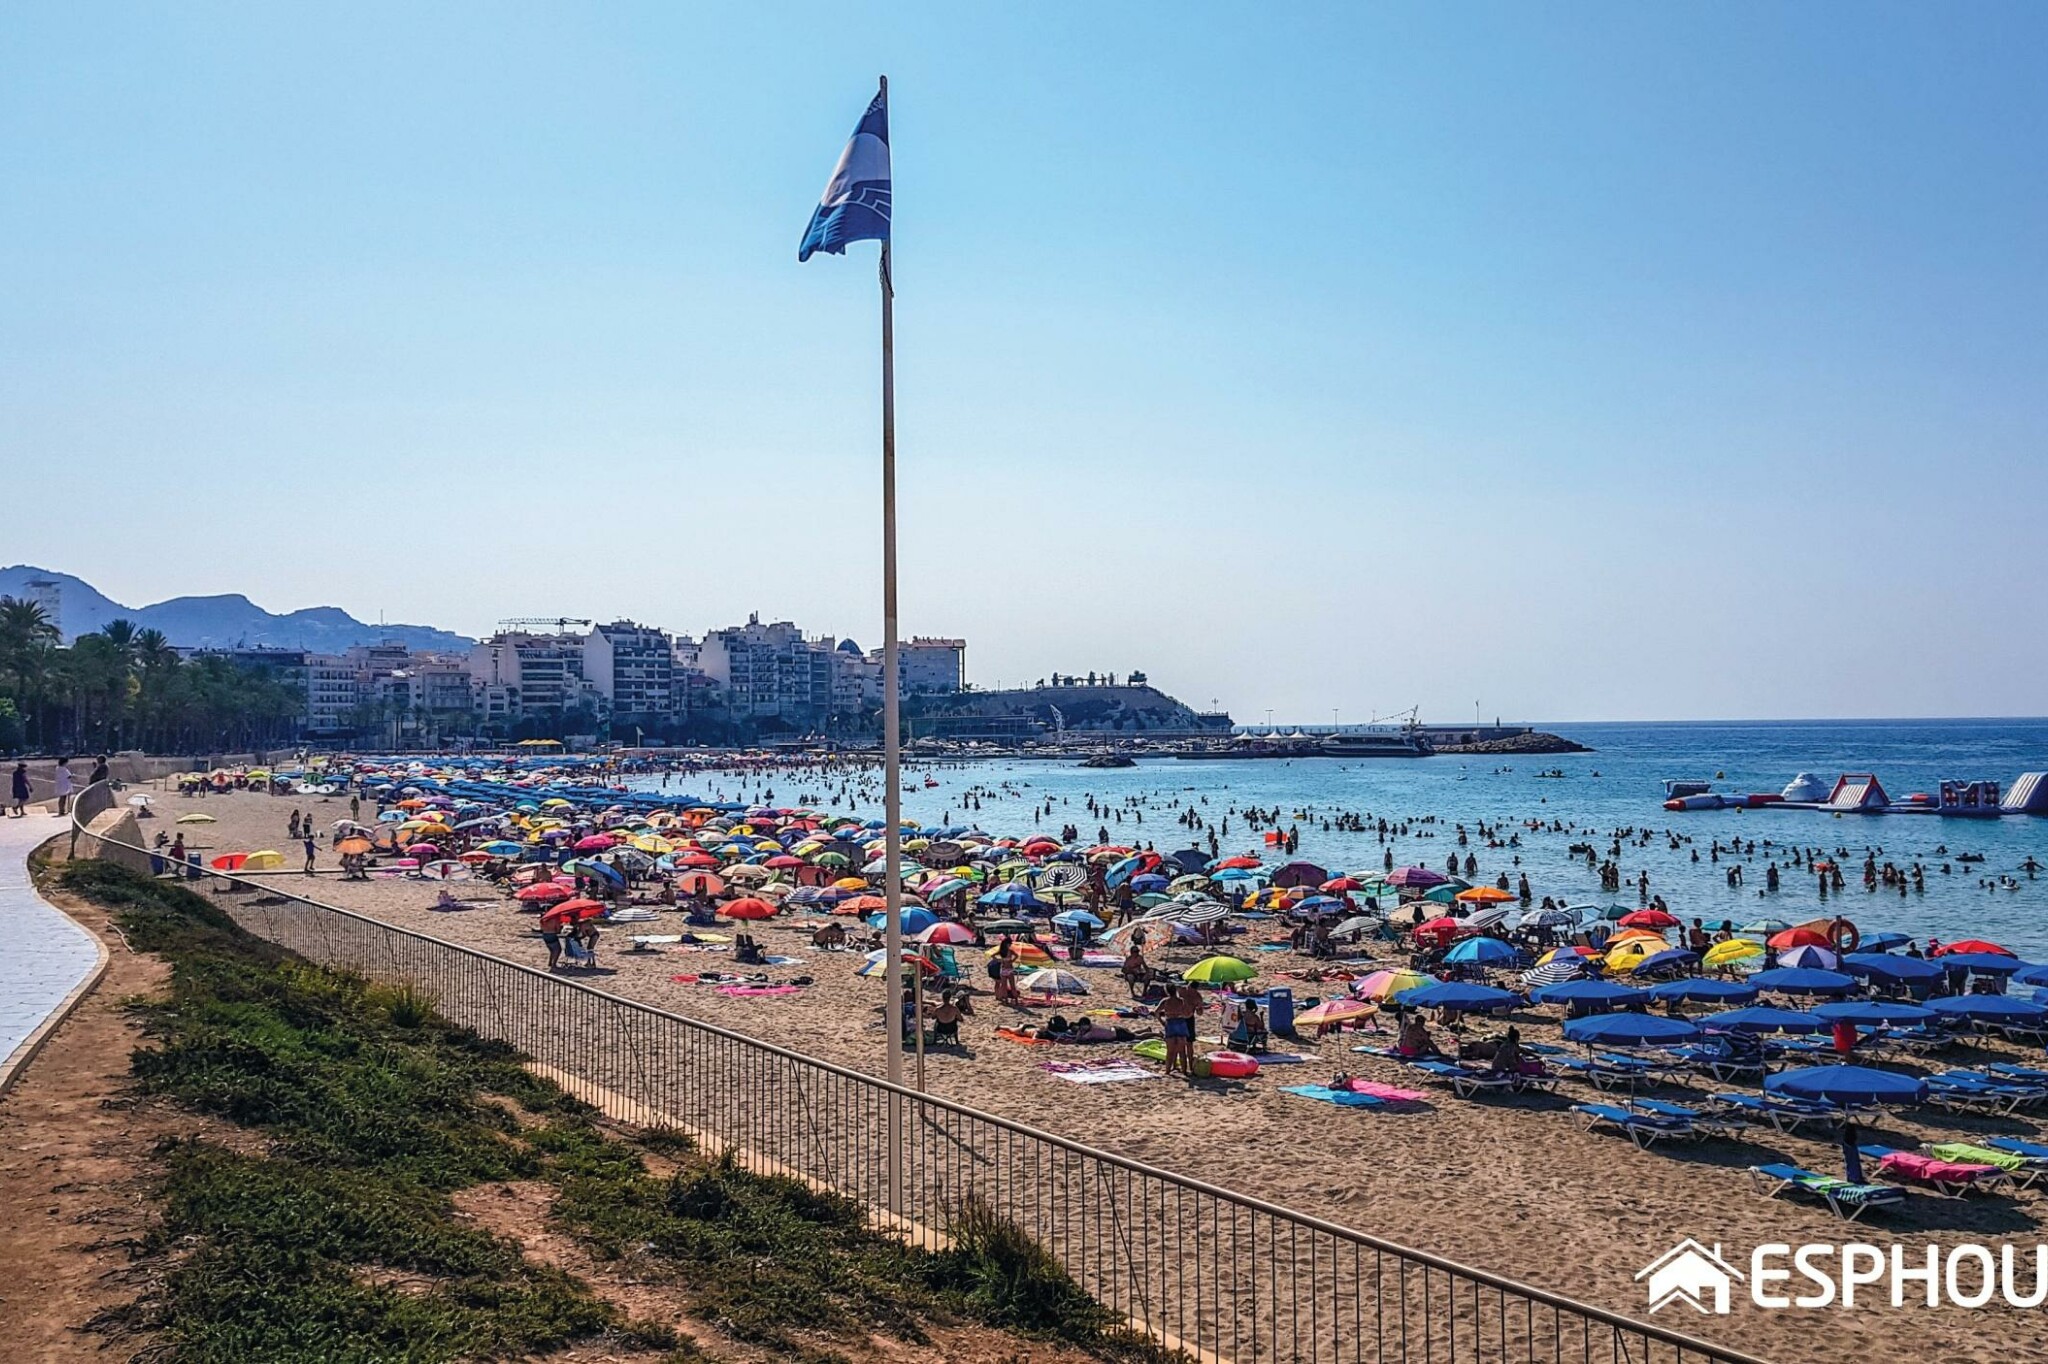 More than 600 blue flags will fly on Spain's beaches in 2022